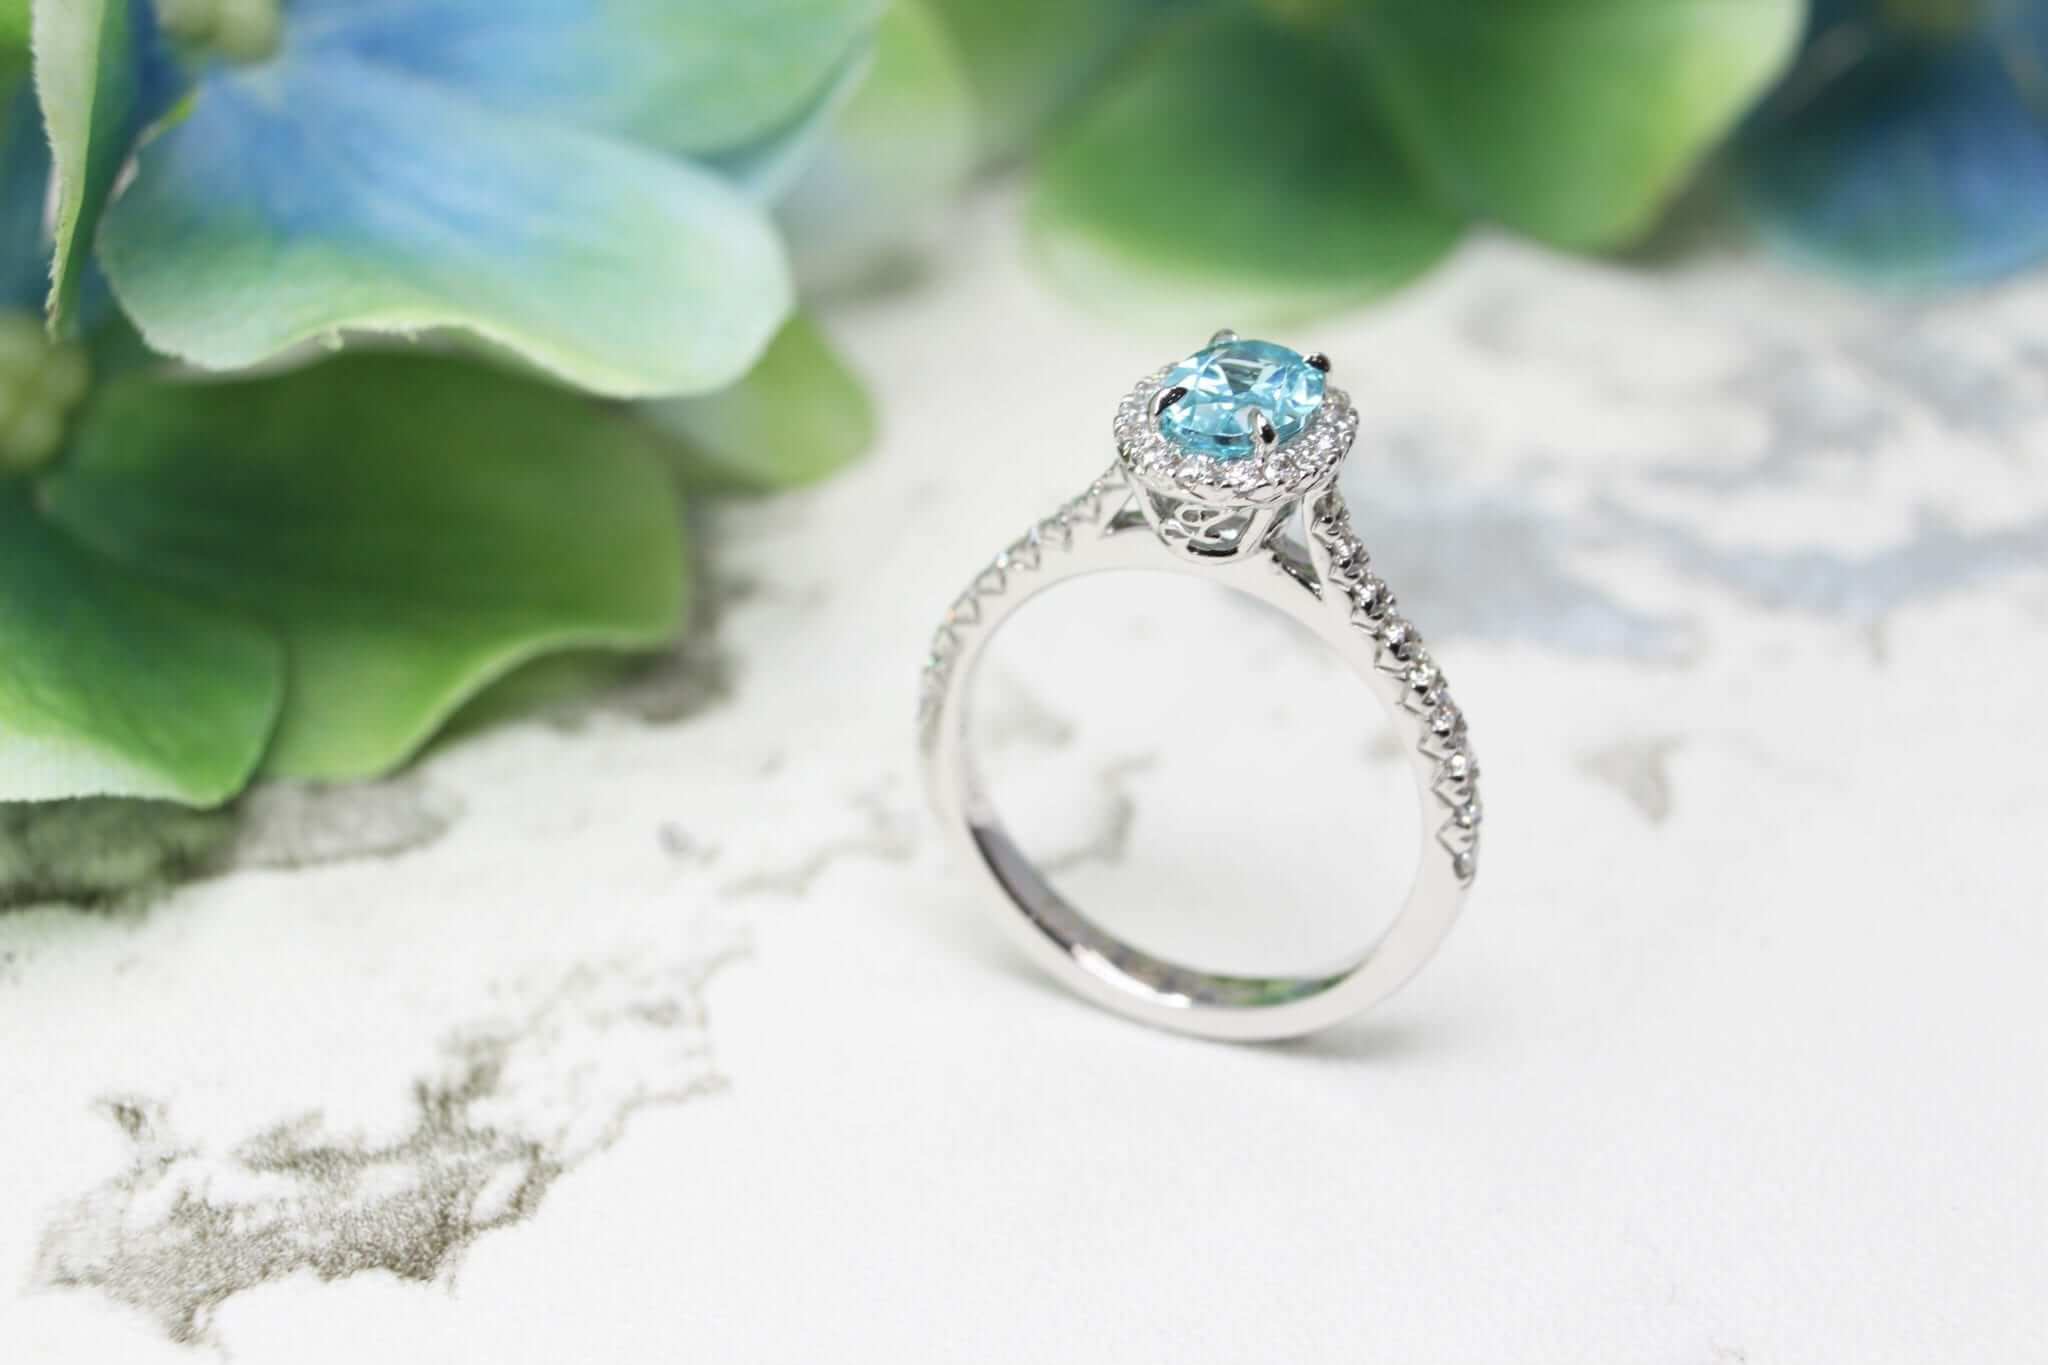 Personalised Engagement Ring with Paraiba Tourmaline Gemstone with unique design for a proposal with own personalised initials on the ring | Customised Jeweller in wedding ring and wedding jewellery with paraiba tourmaline gemstone in Singapore